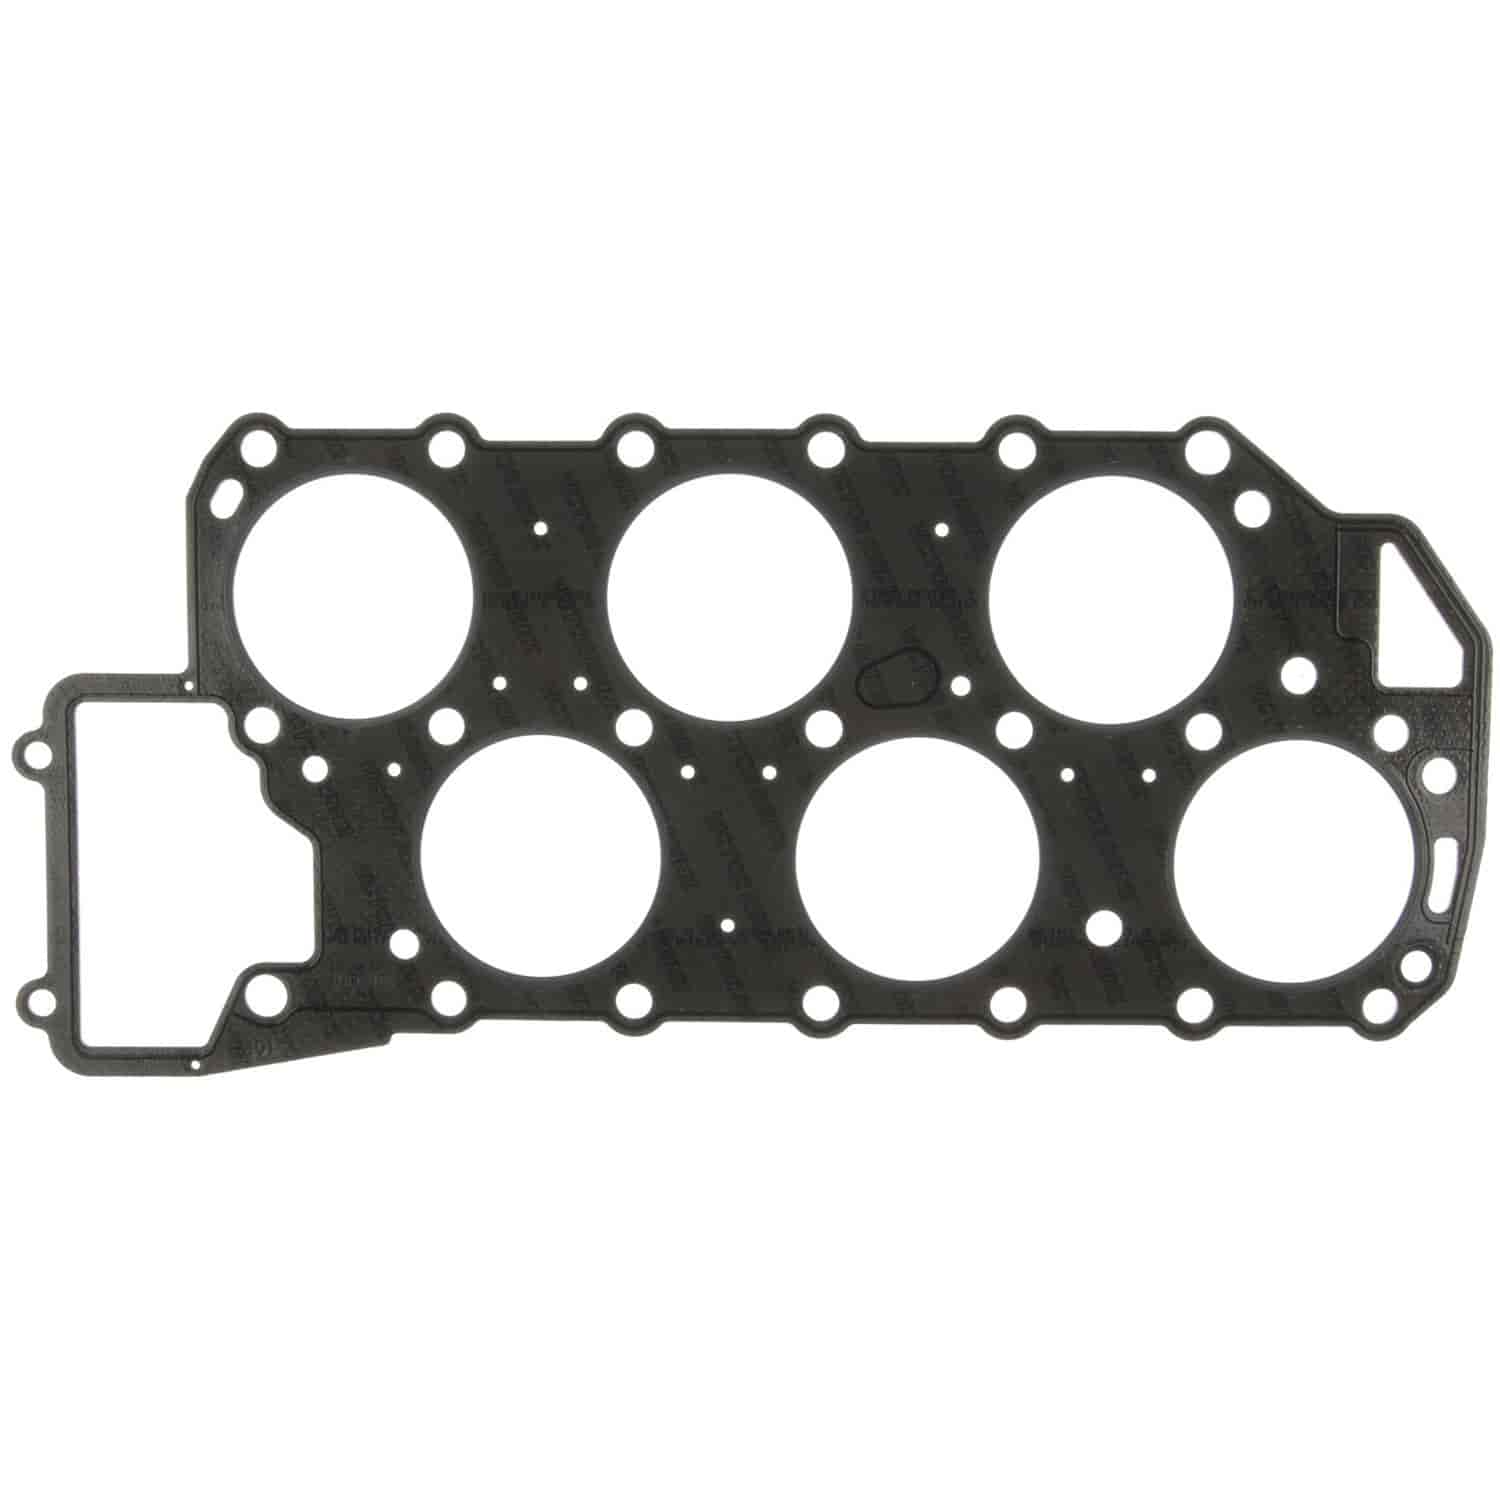 Cylinder Head Gasket VW 2.8L AAA VR6 1992-2000 staggered inline 6